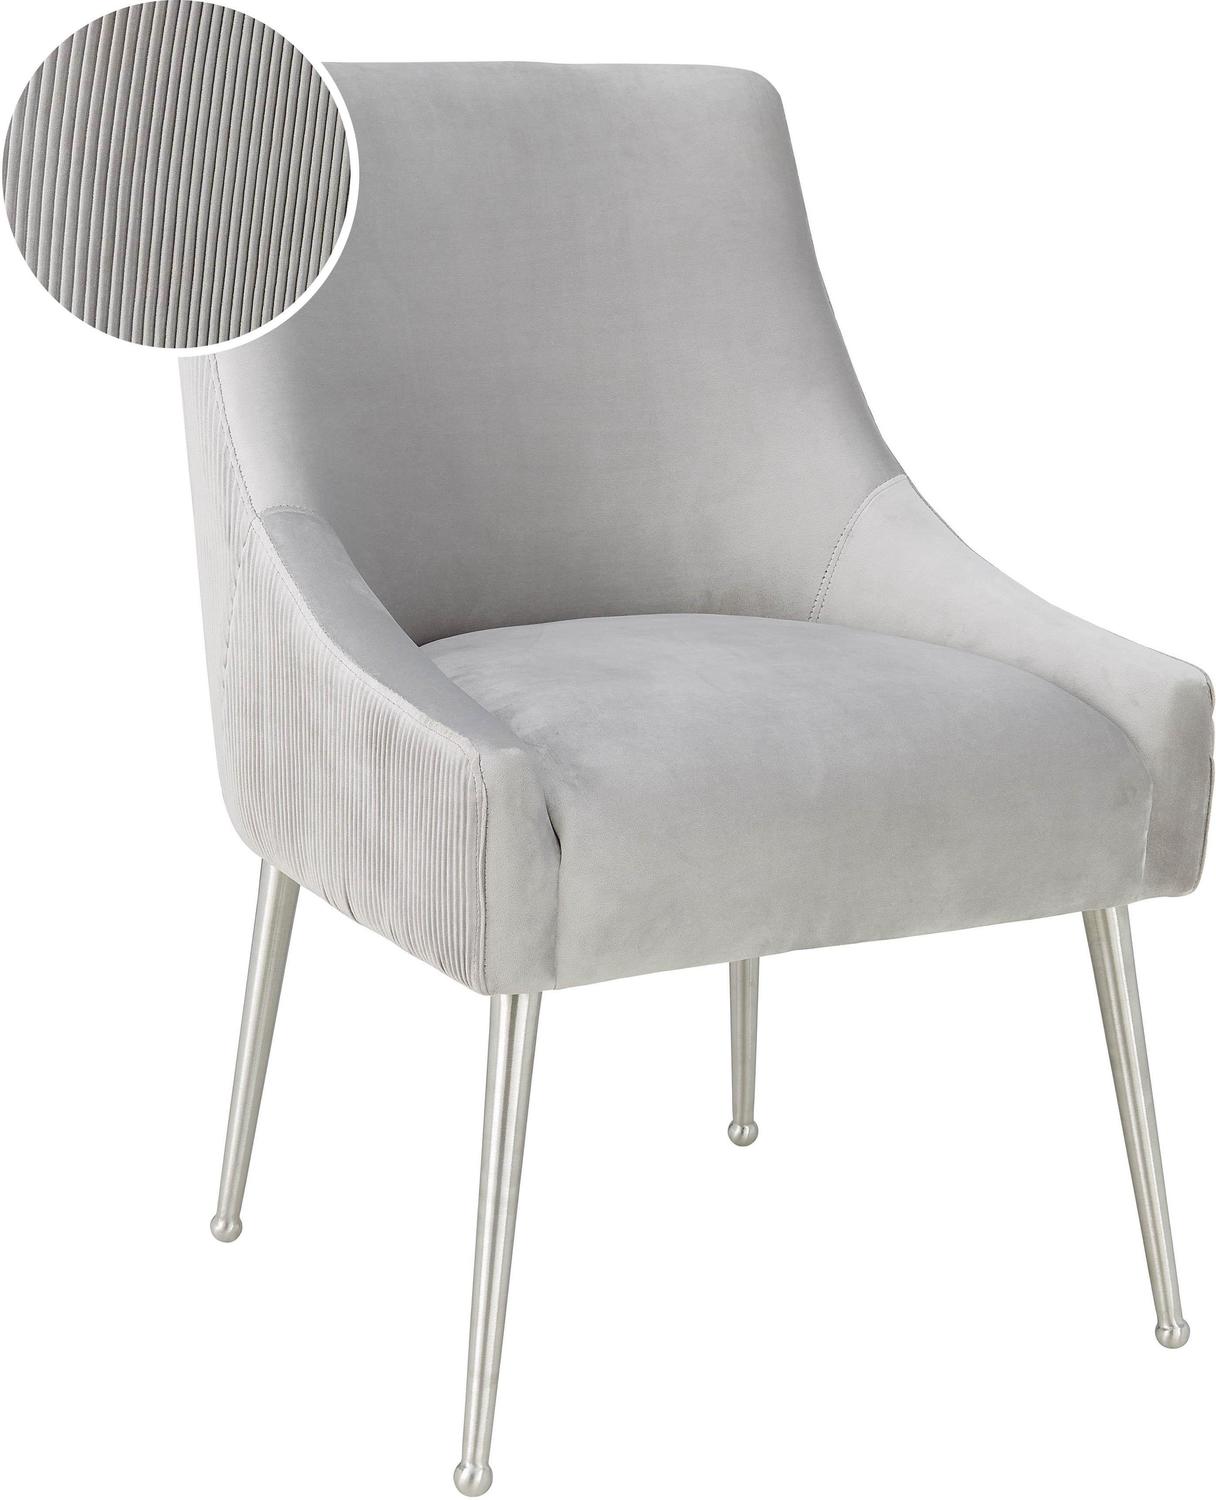  Tov Furniture Dining Chairs Chairs Light Grey